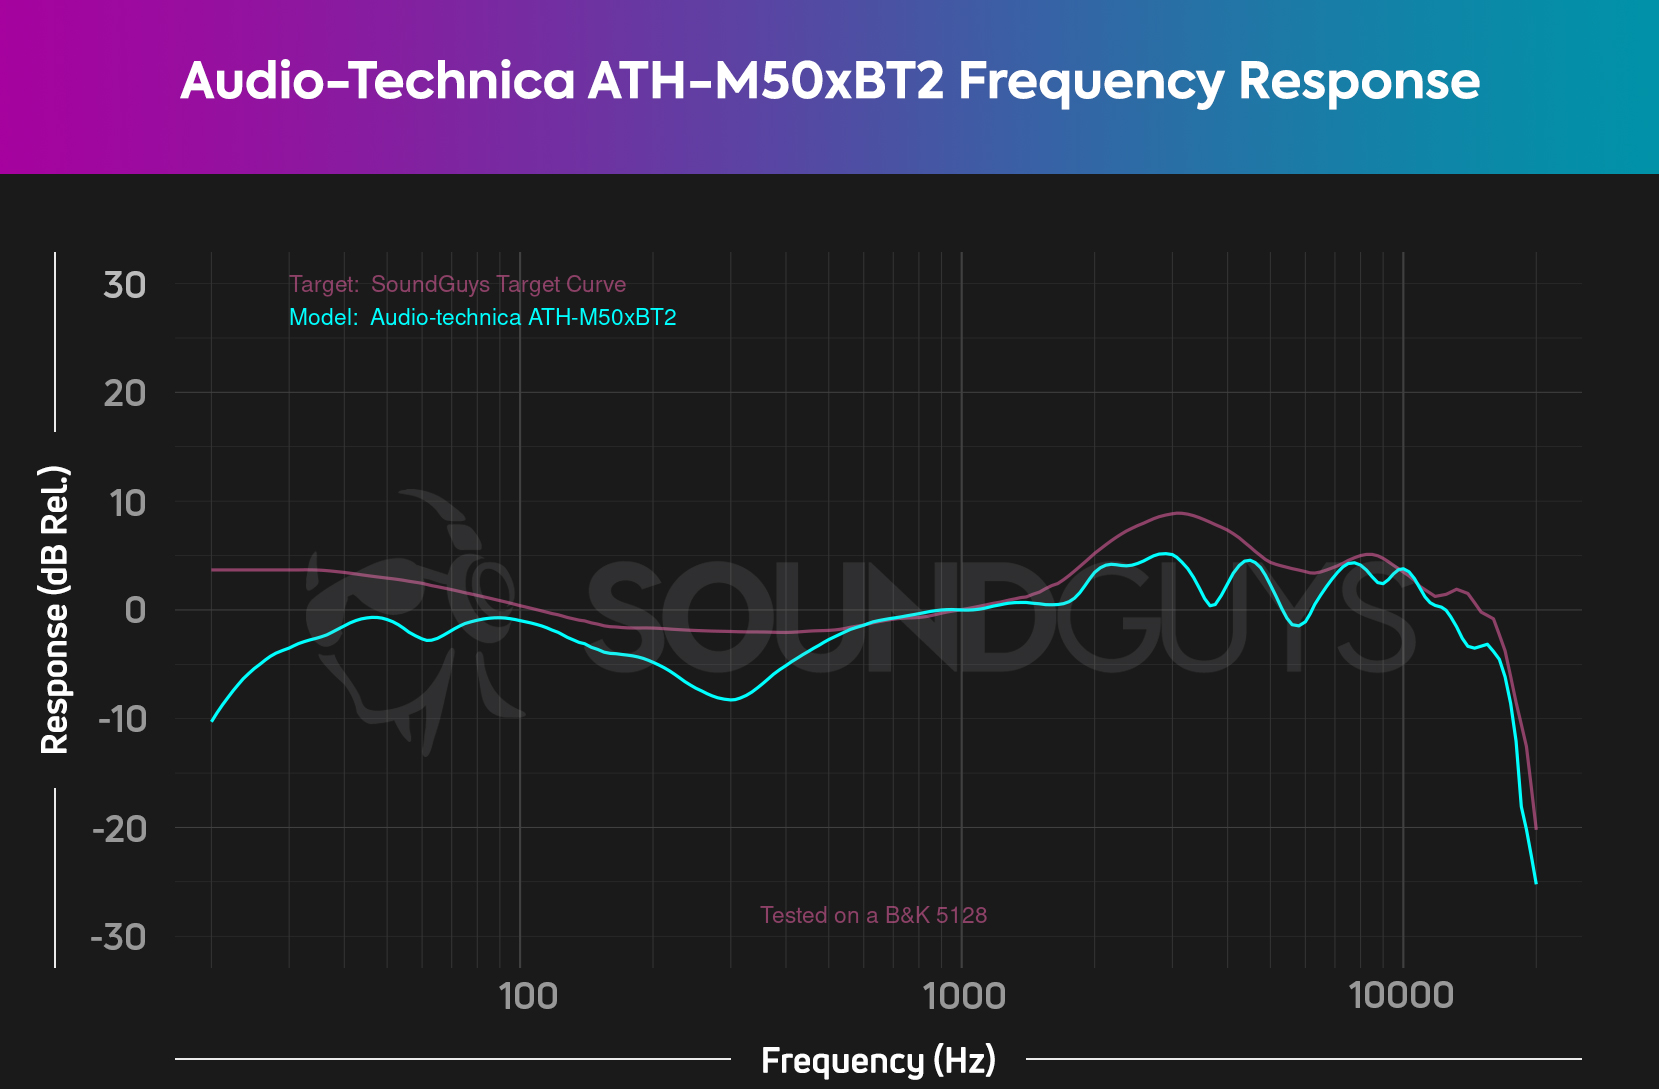 A frequency response chart compares the Audio-Technica ATH-M50xBT2 to our target curve with the ATH-M50xBT2 mostly under-emphasizing each frequency.